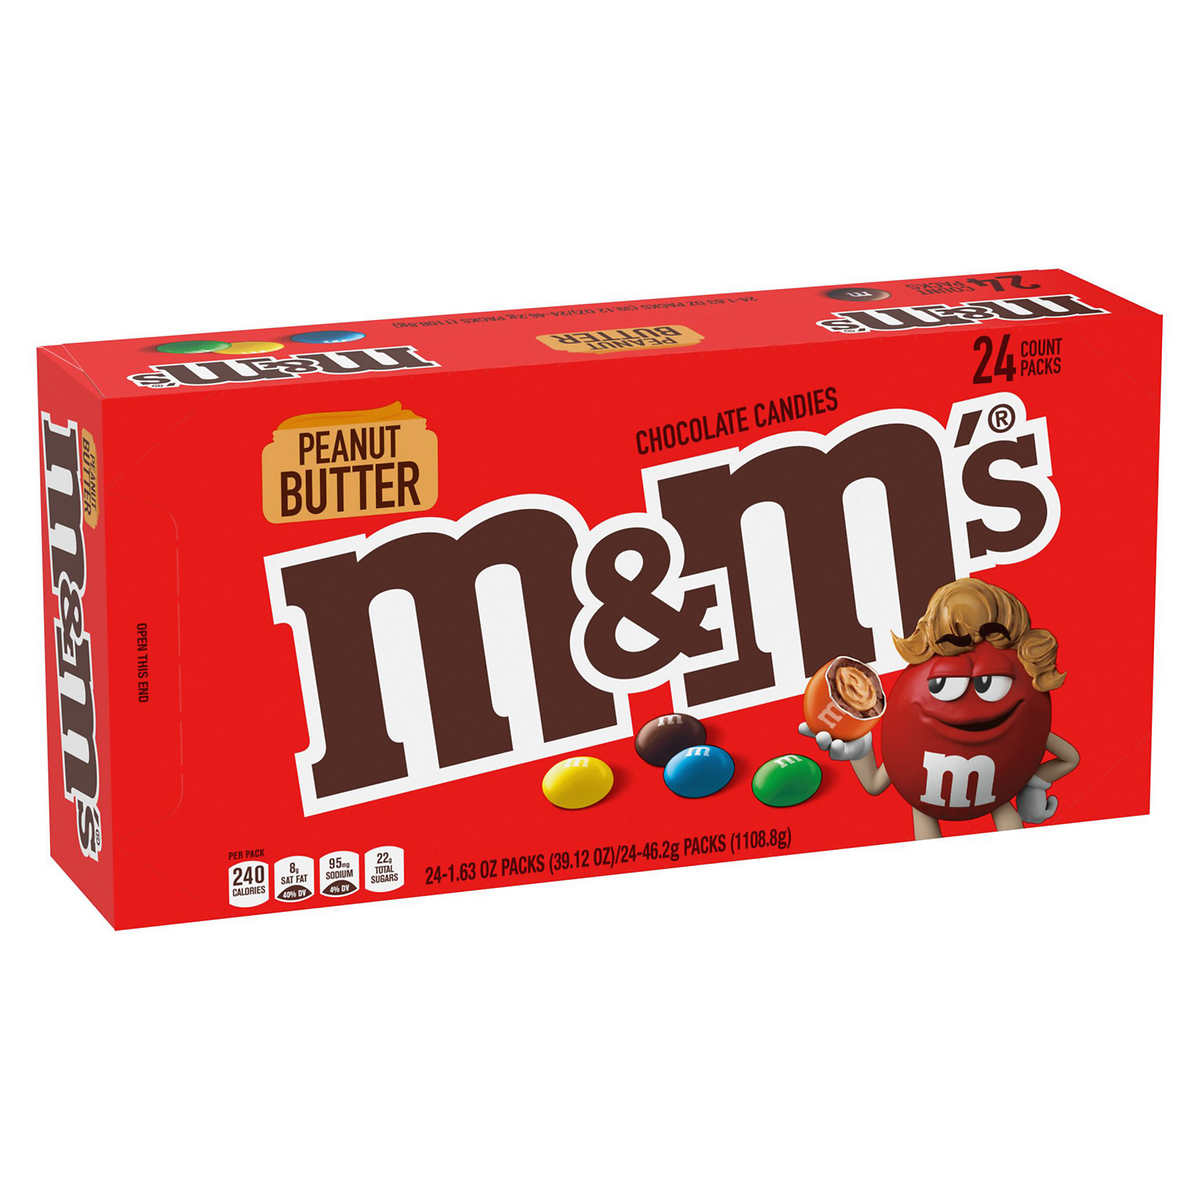 M&m candy • Compare (100+ products) see the best price »